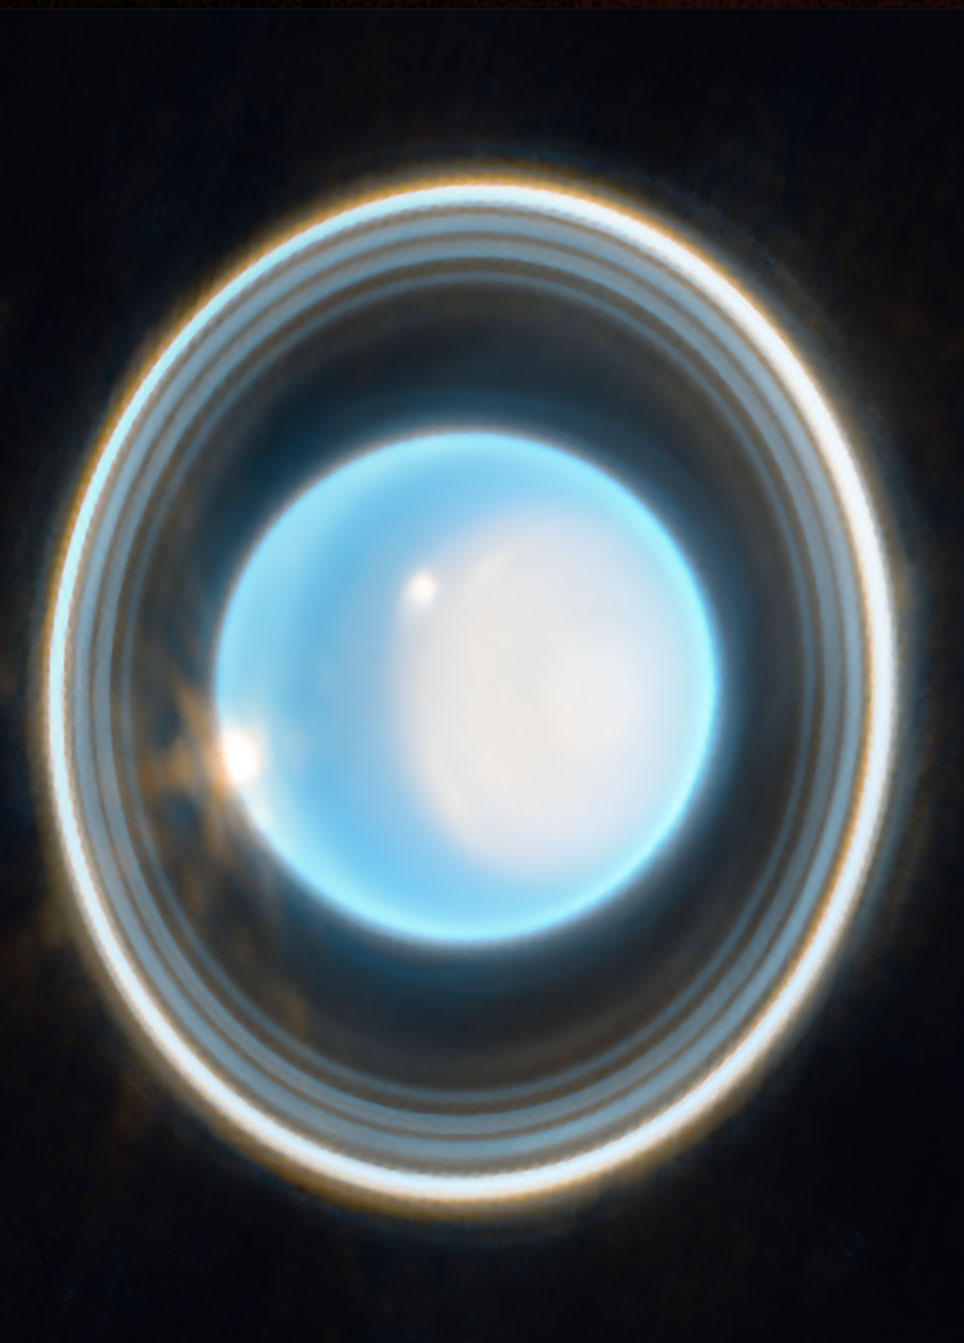 The planet Uranus and its ring system